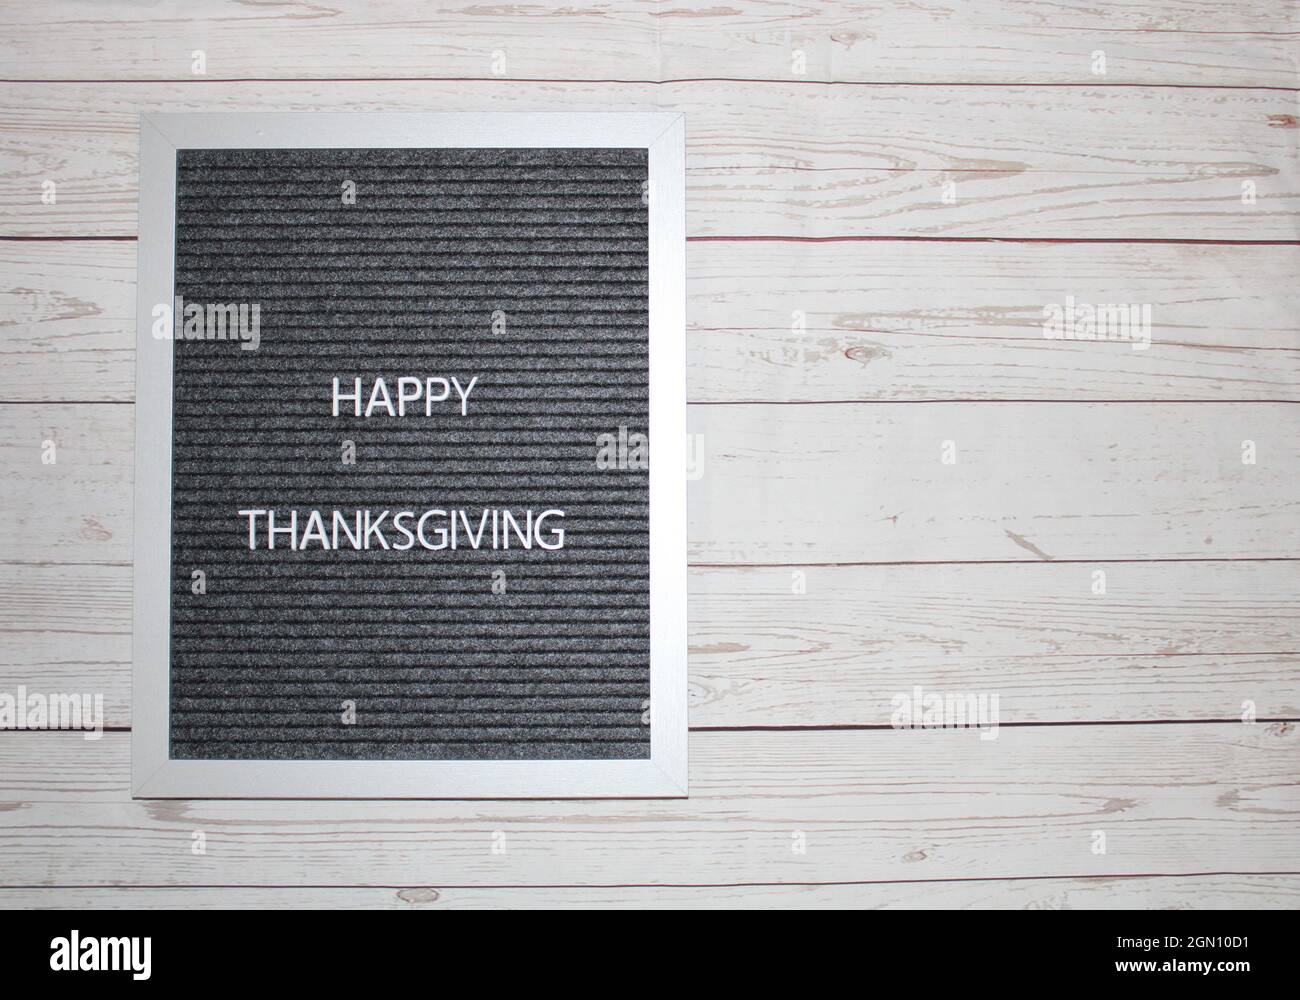 Happy Thanksgiving with negative space. Stock Photo